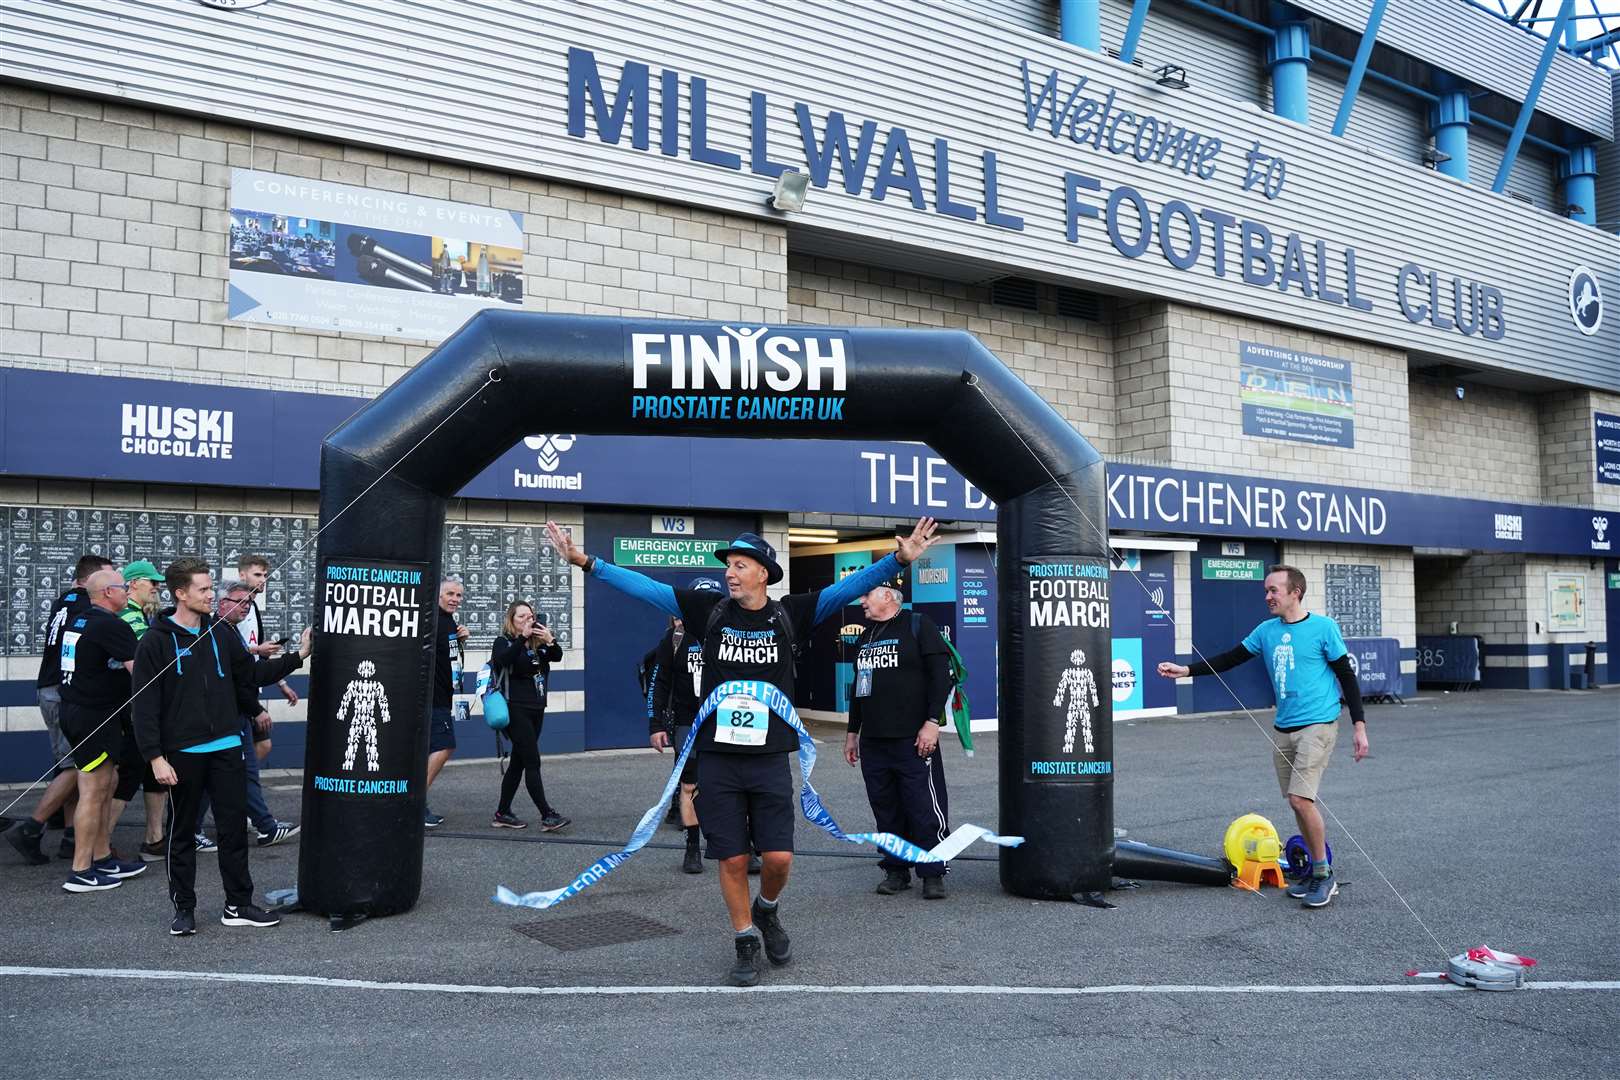 Kevin Webber crossing the finish line at Jeff Stelling’s football march outside Millwall Football Club (Rosie Lonsdale/Prostate Cancer UK)